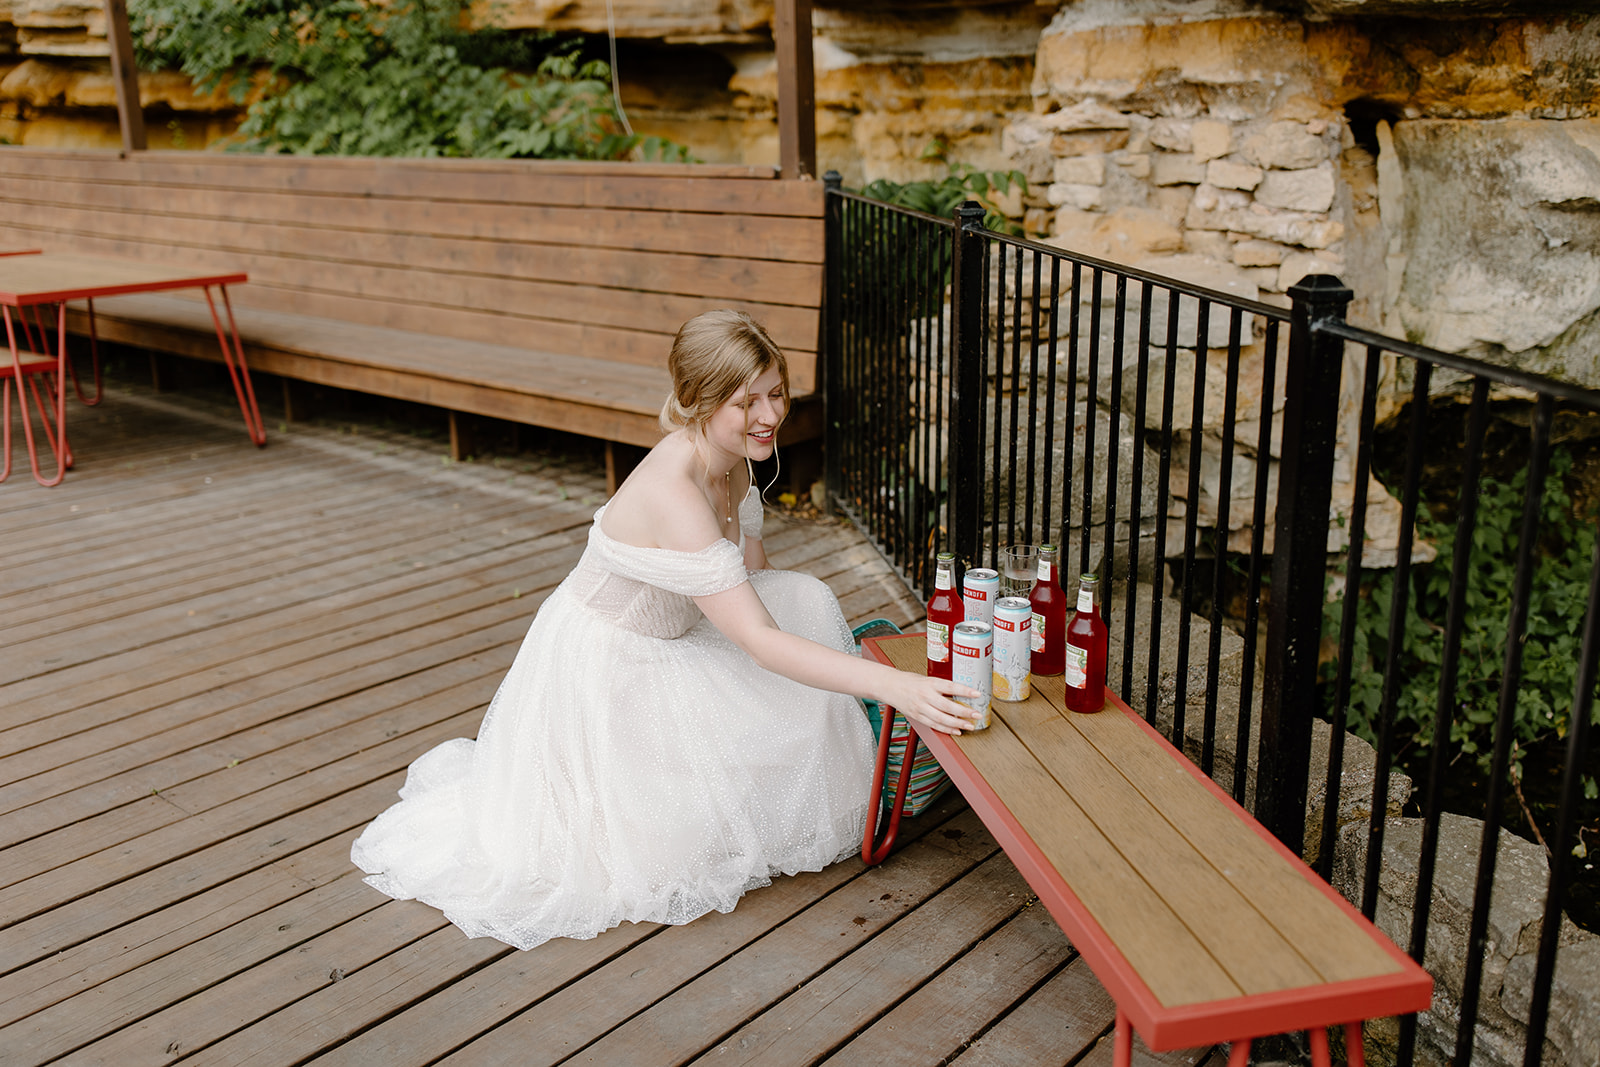 Bride setting up drinks to ICE her friends